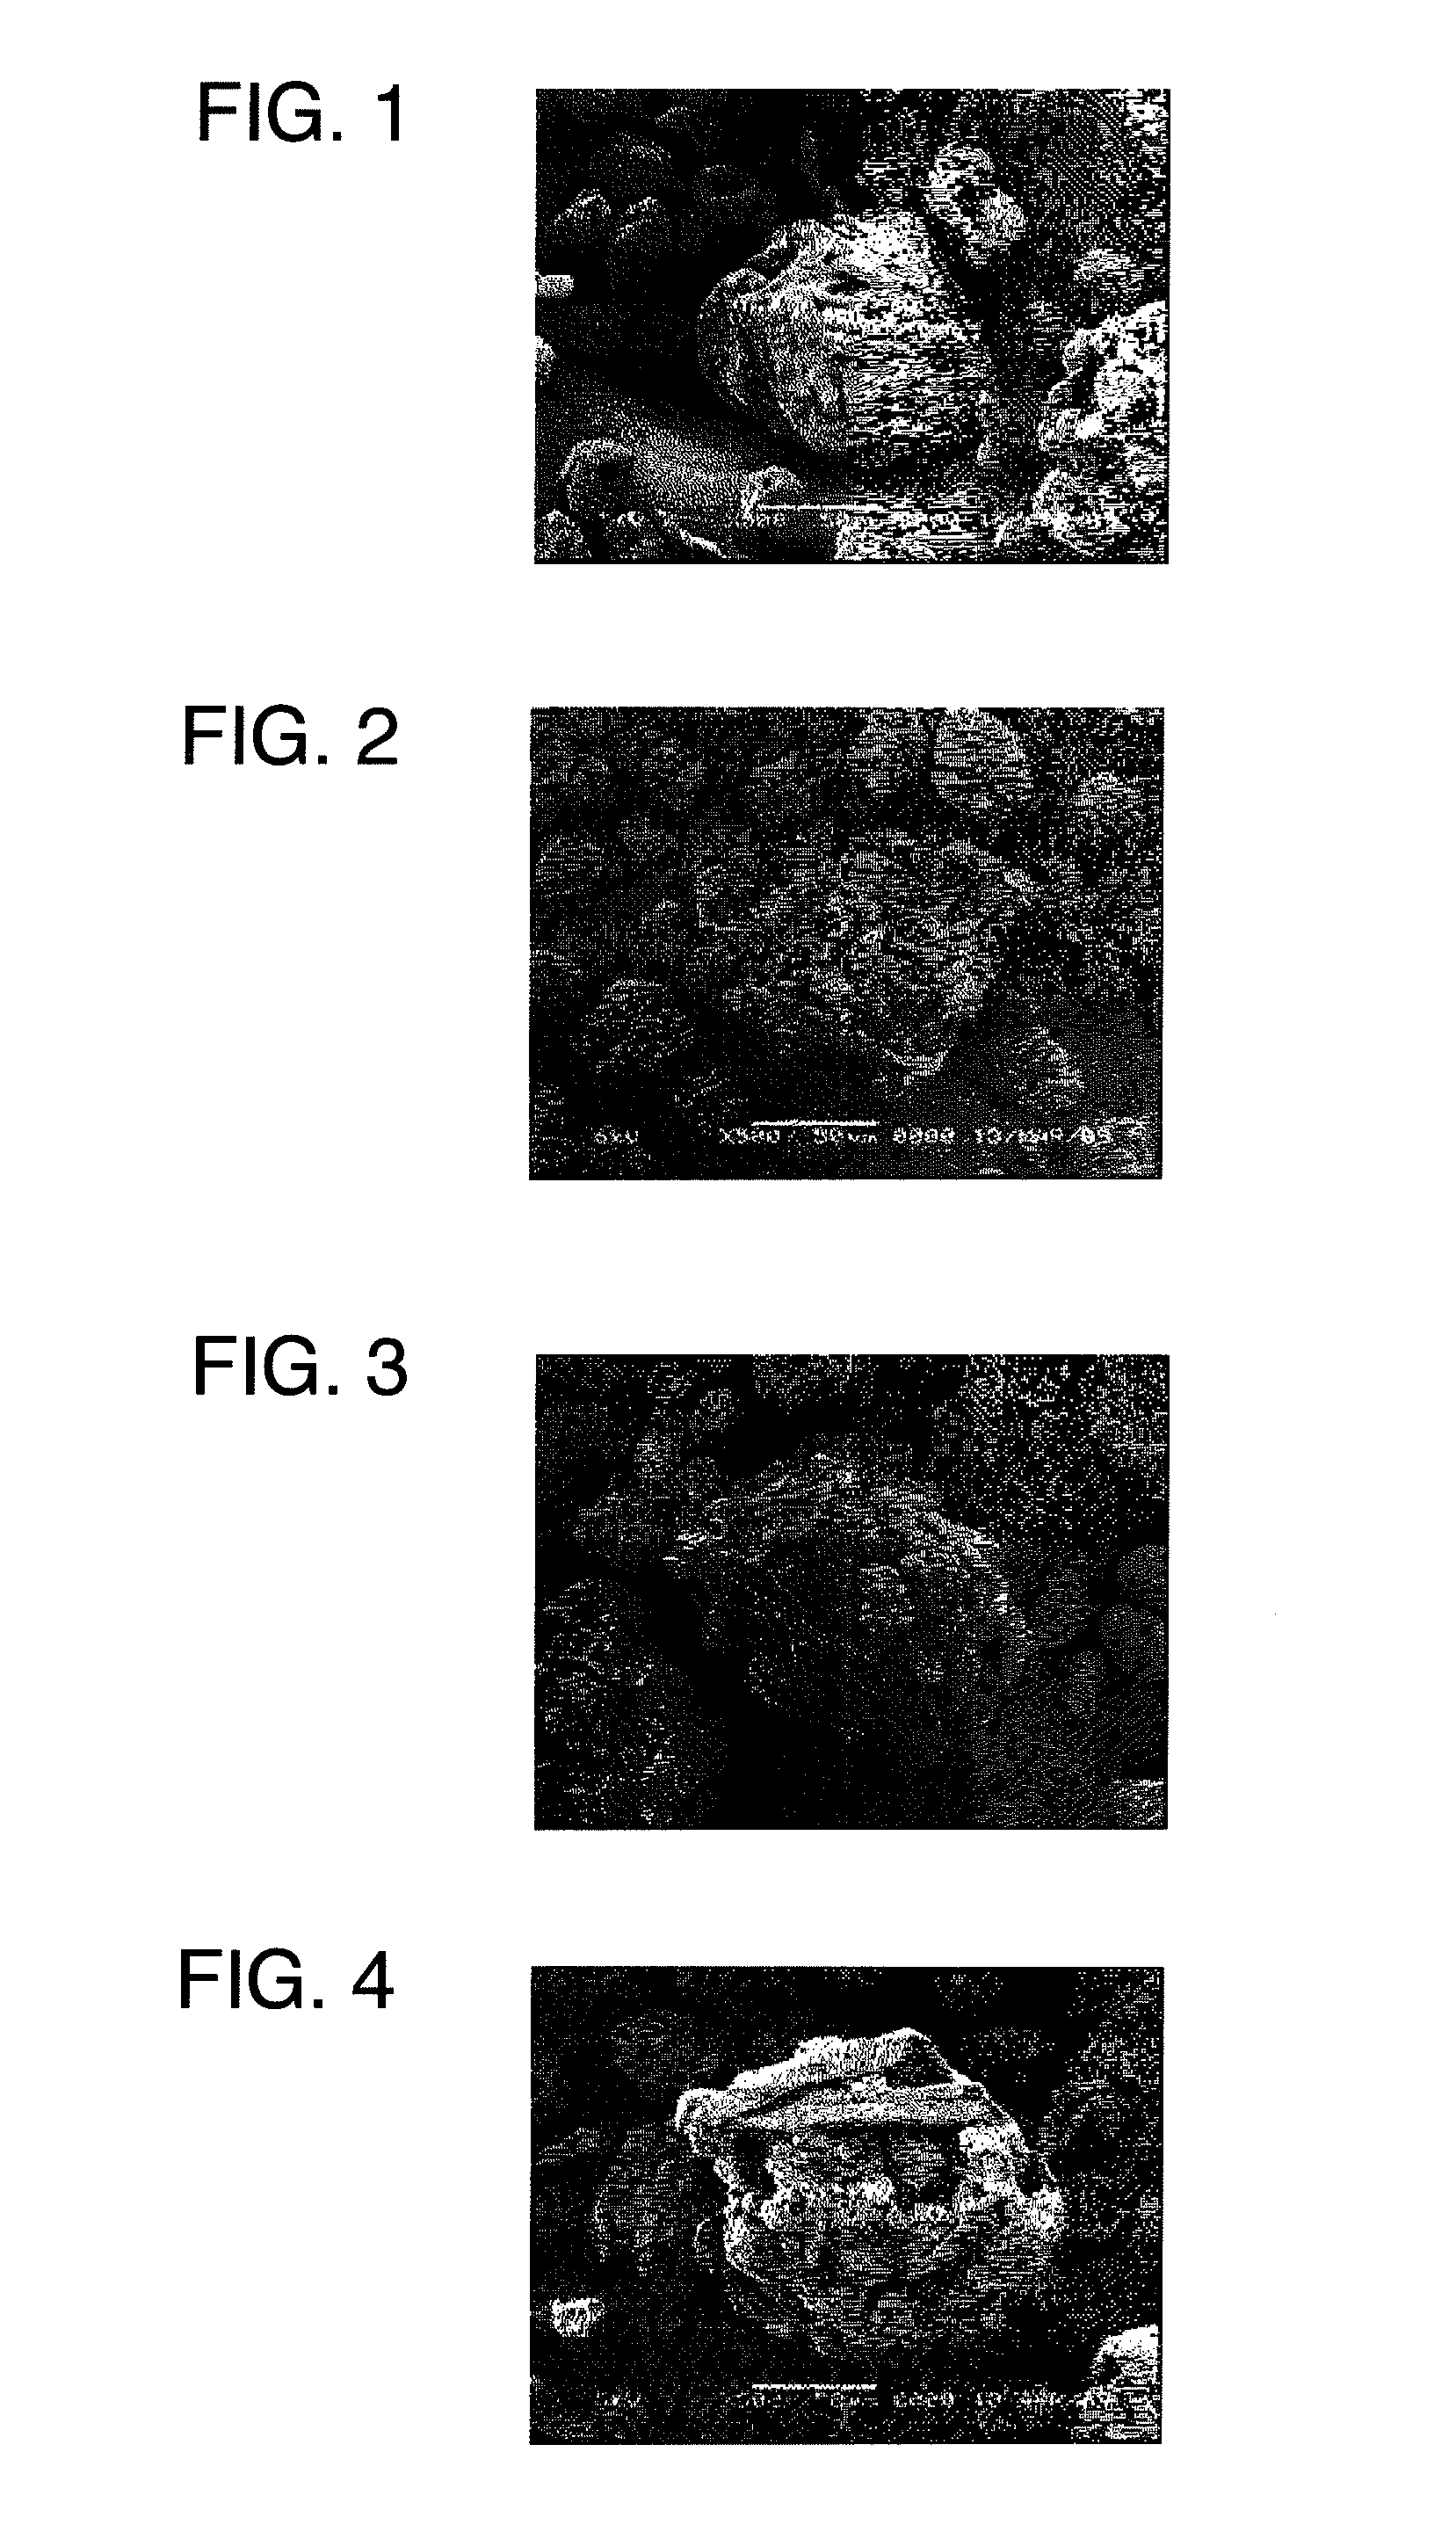 Composite particles which contain both cellulose and inorganic compound